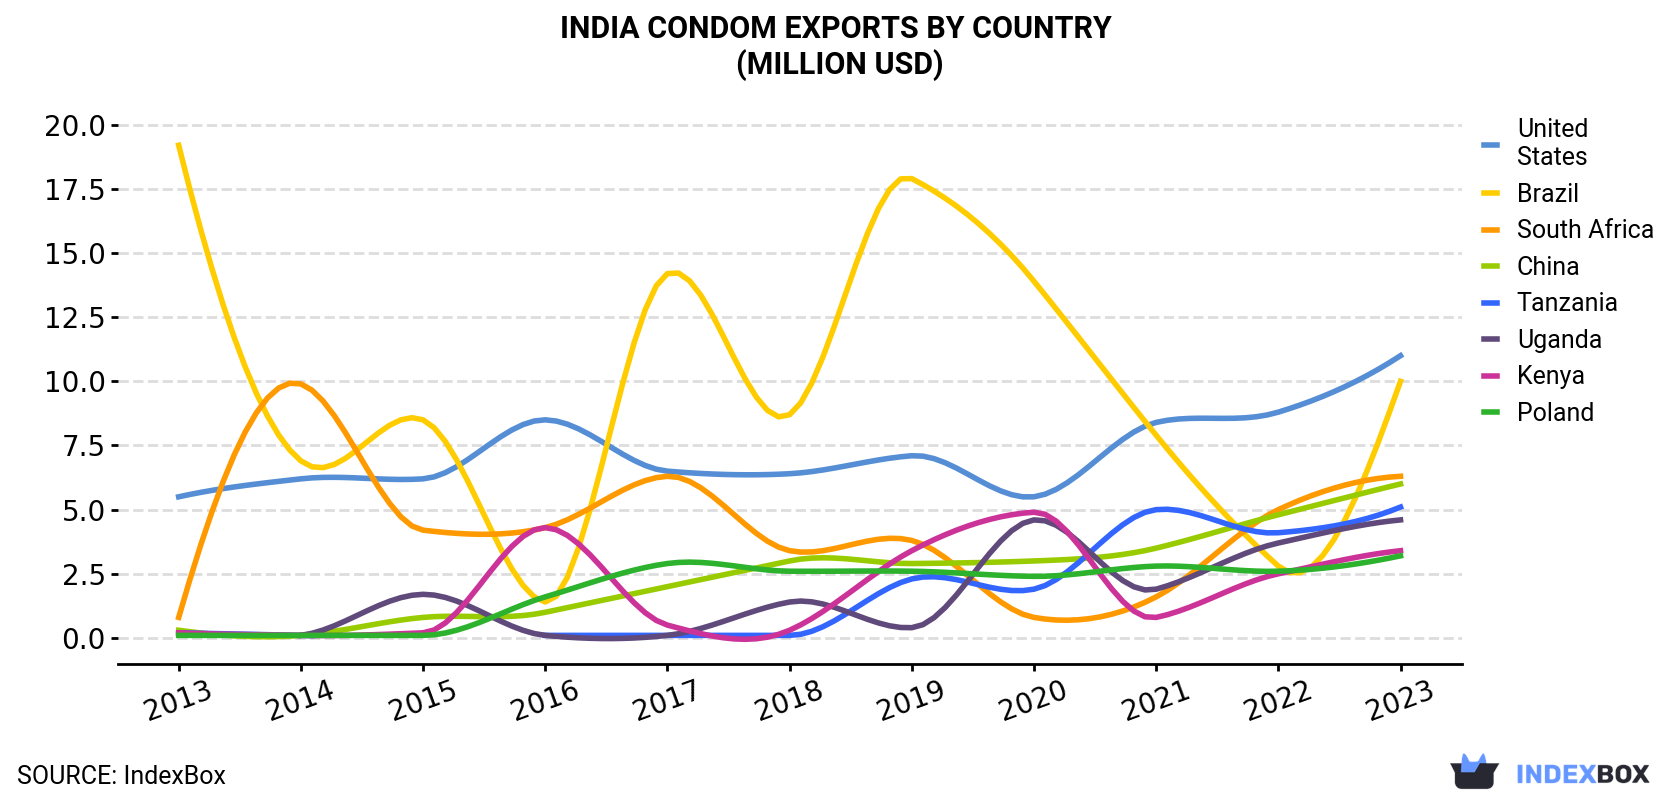 India Condom Exports By Country (Million USD)